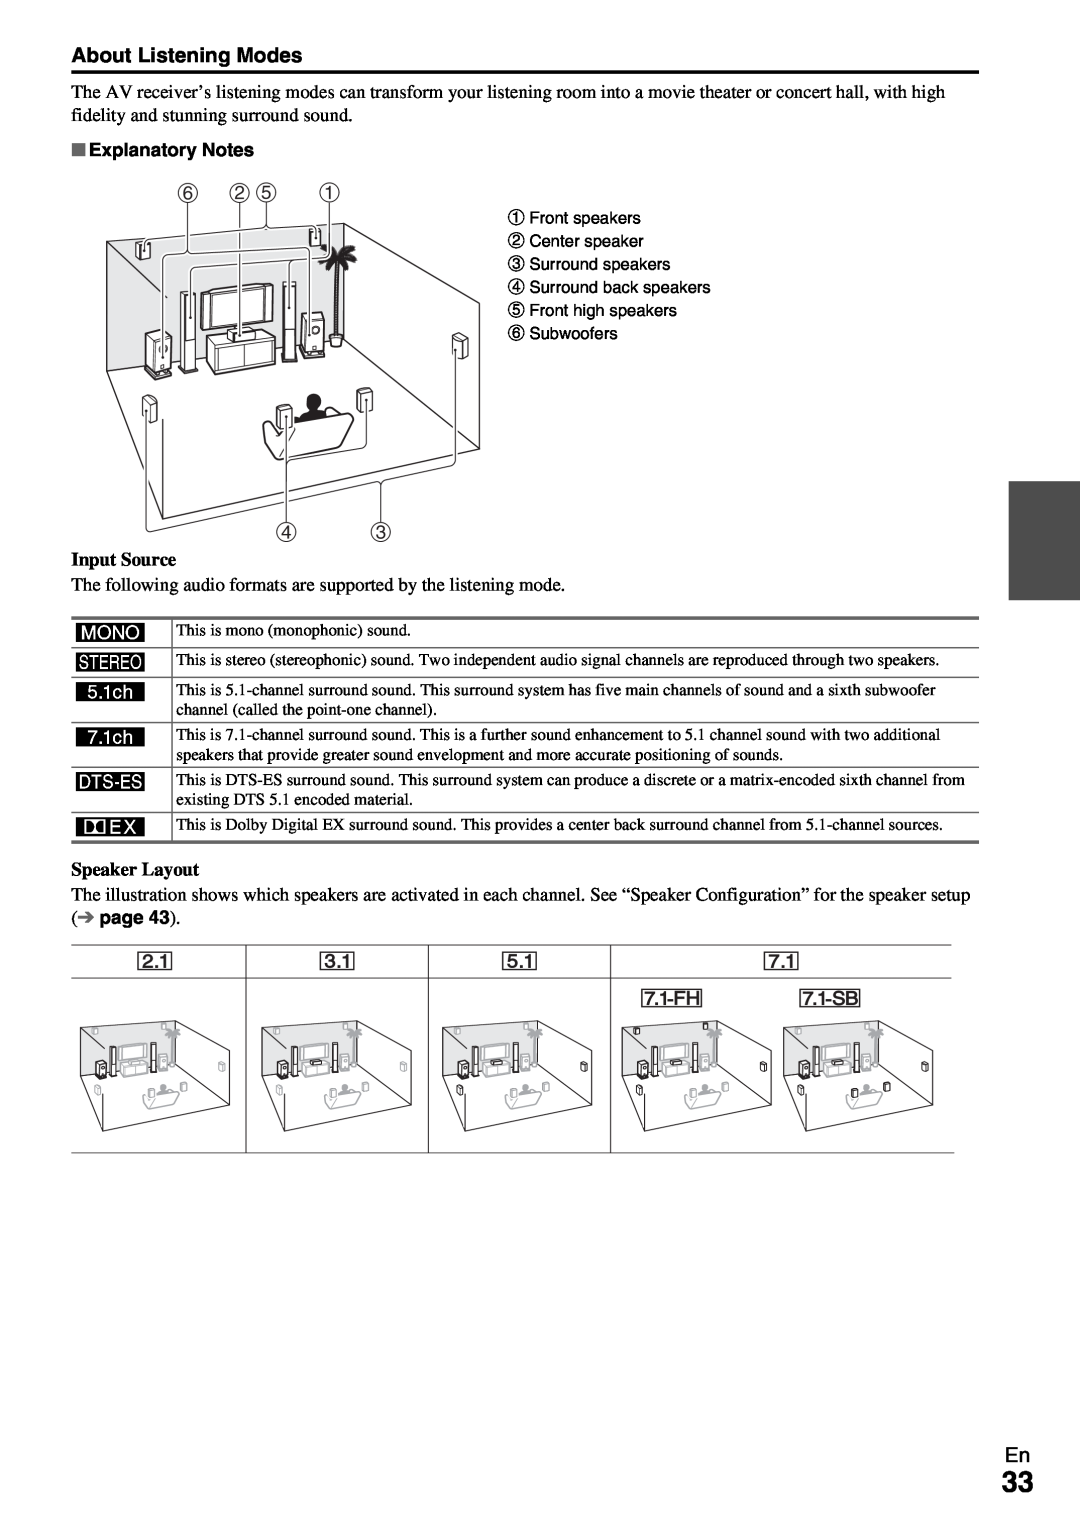 Onkyo TX-NR579 instruction manual About Listening Modes, f b e a, Explanatory Notes, page 